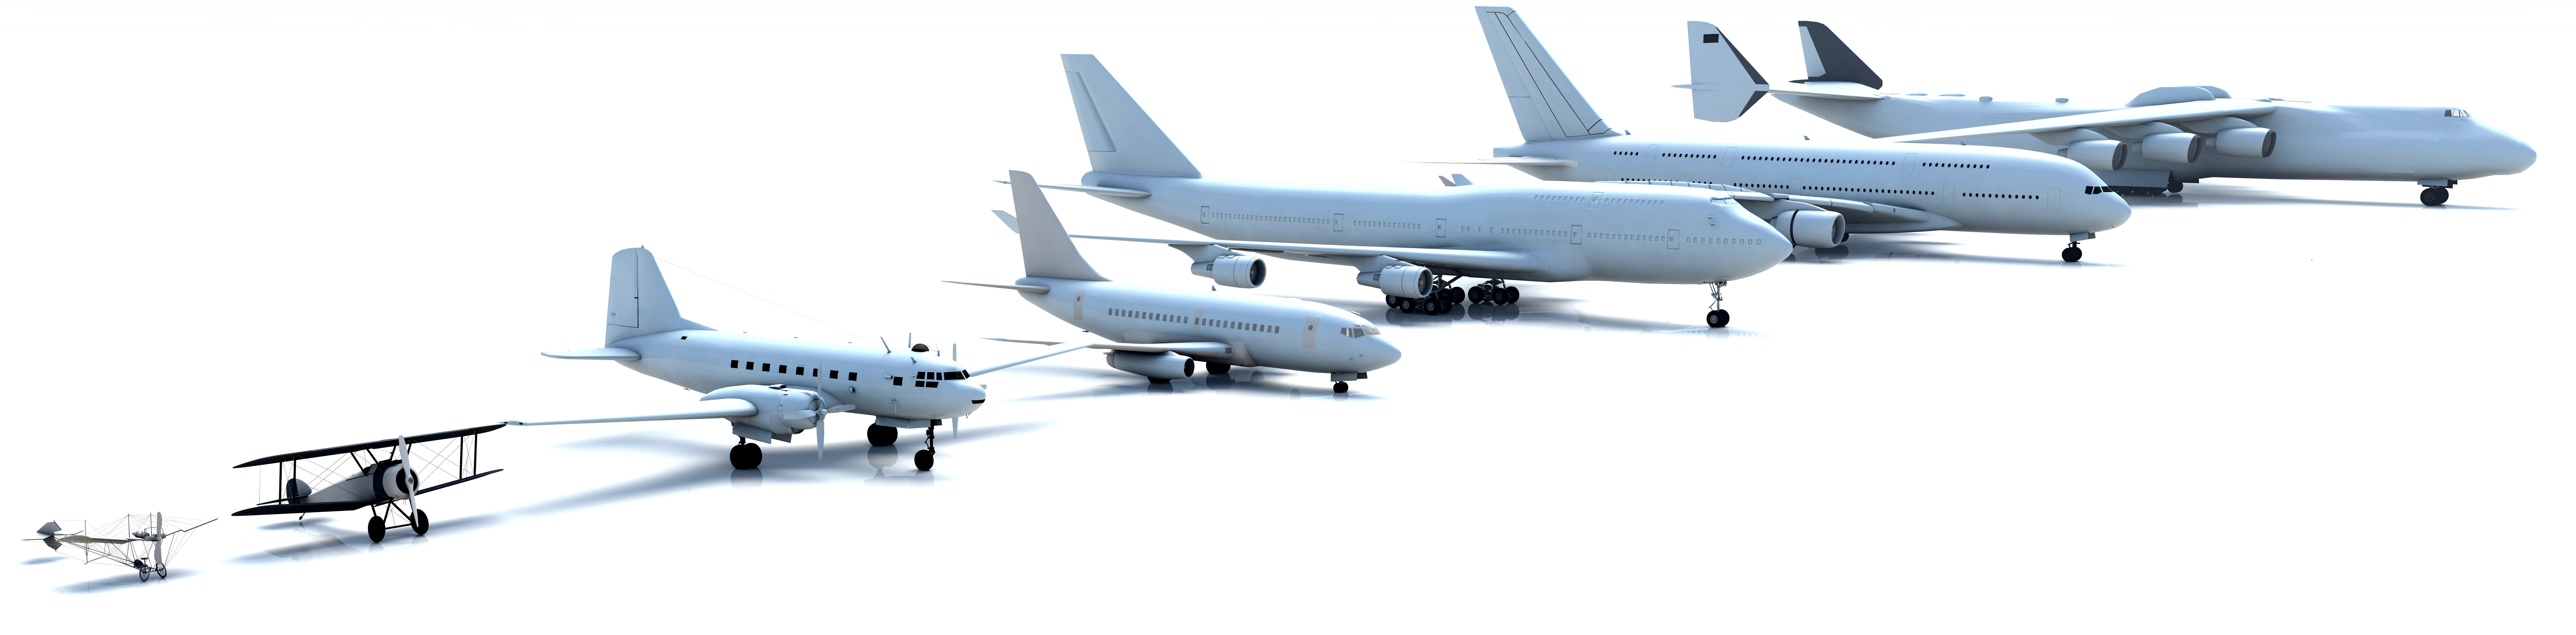 Row of various airplanes from small to jumbo